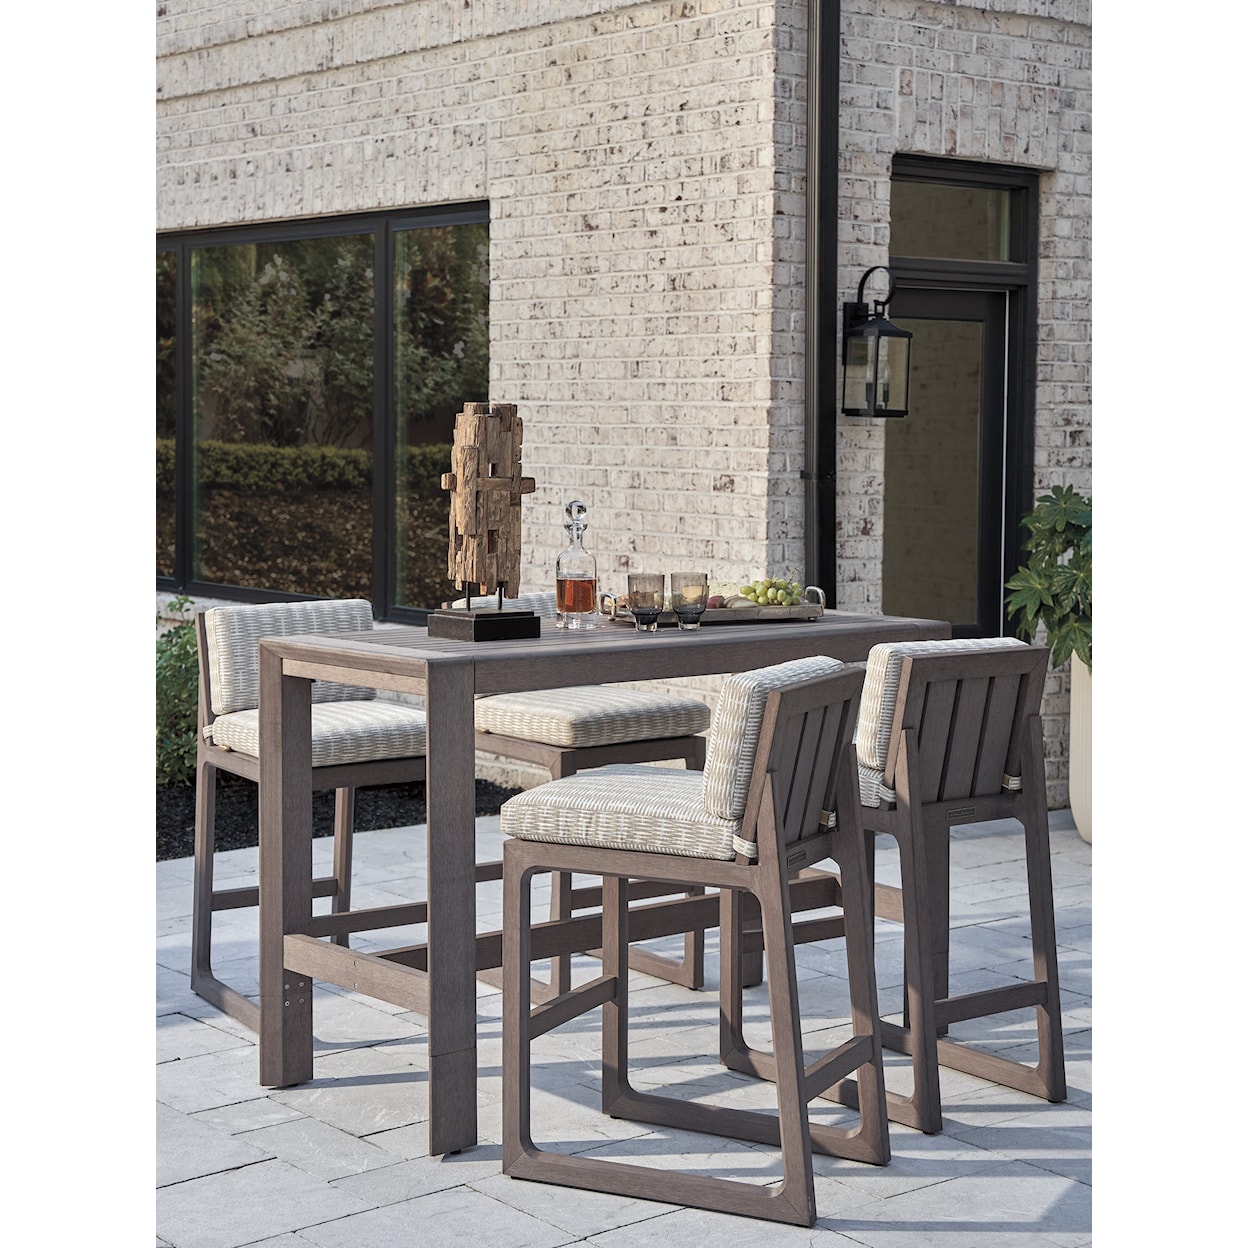 Tommy Bahama Outdoor Living Mozambique Outdoor Bar Stool